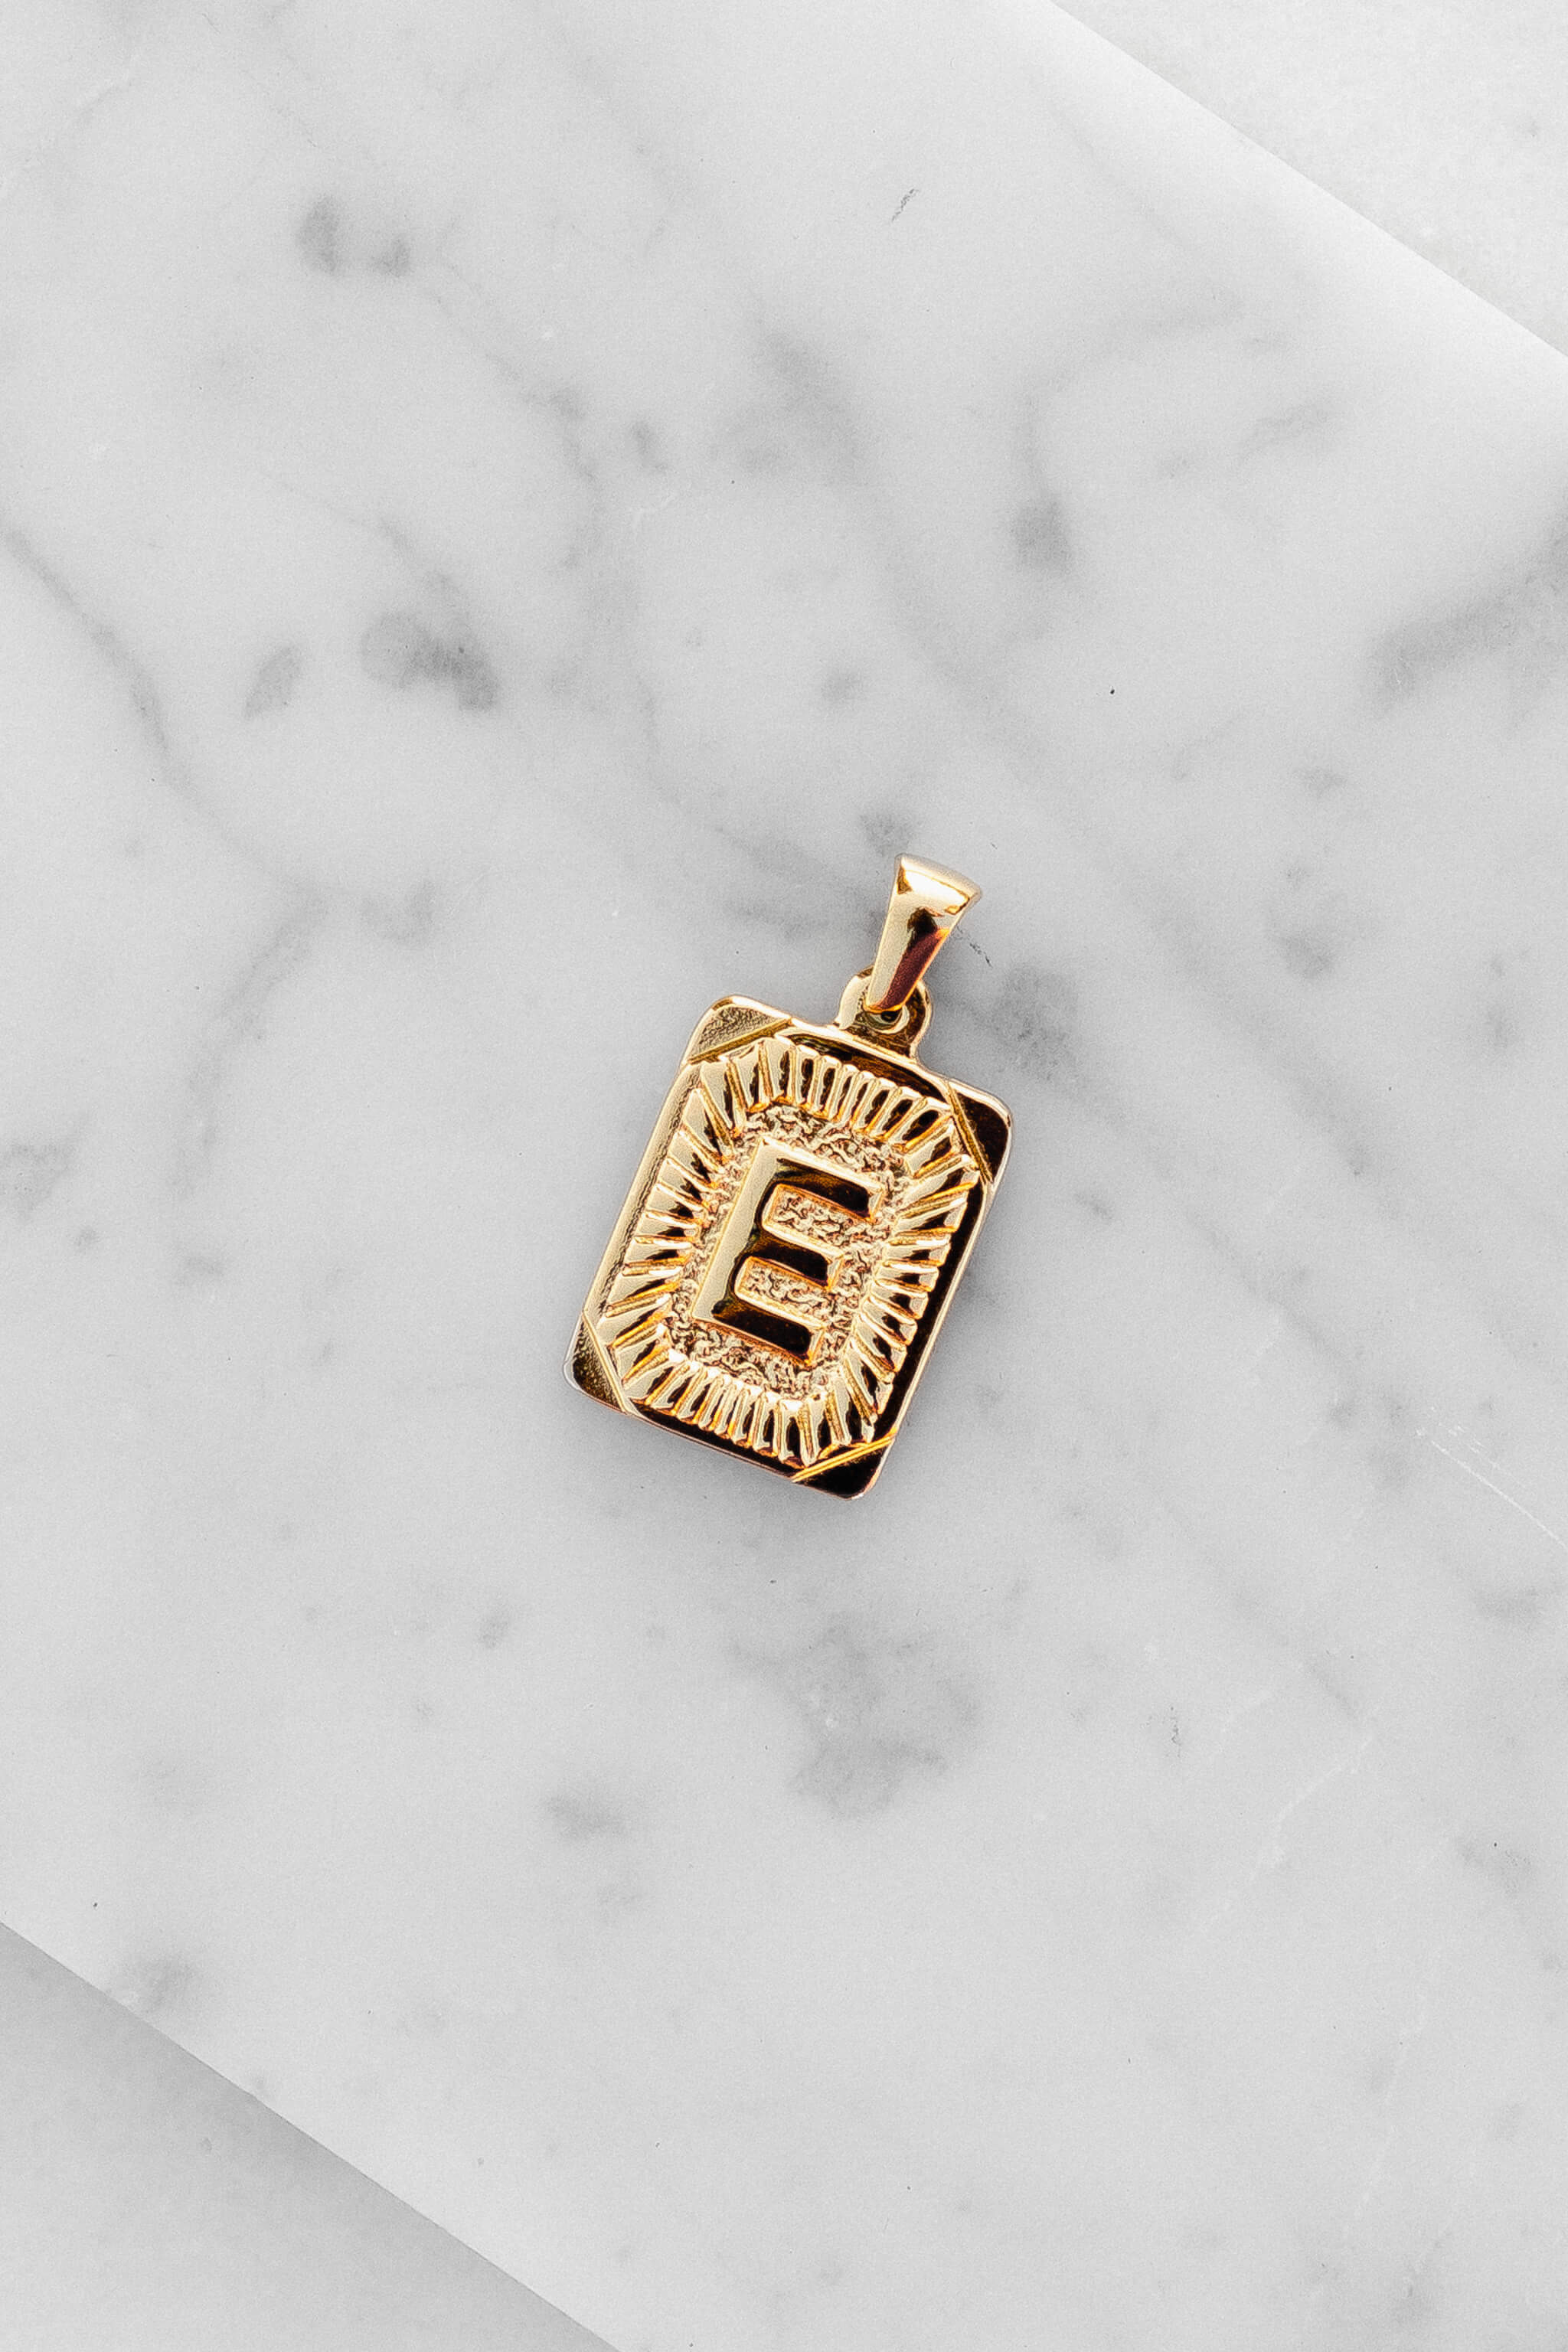 Gold Monogram Letter "E" Charm laying on a marble